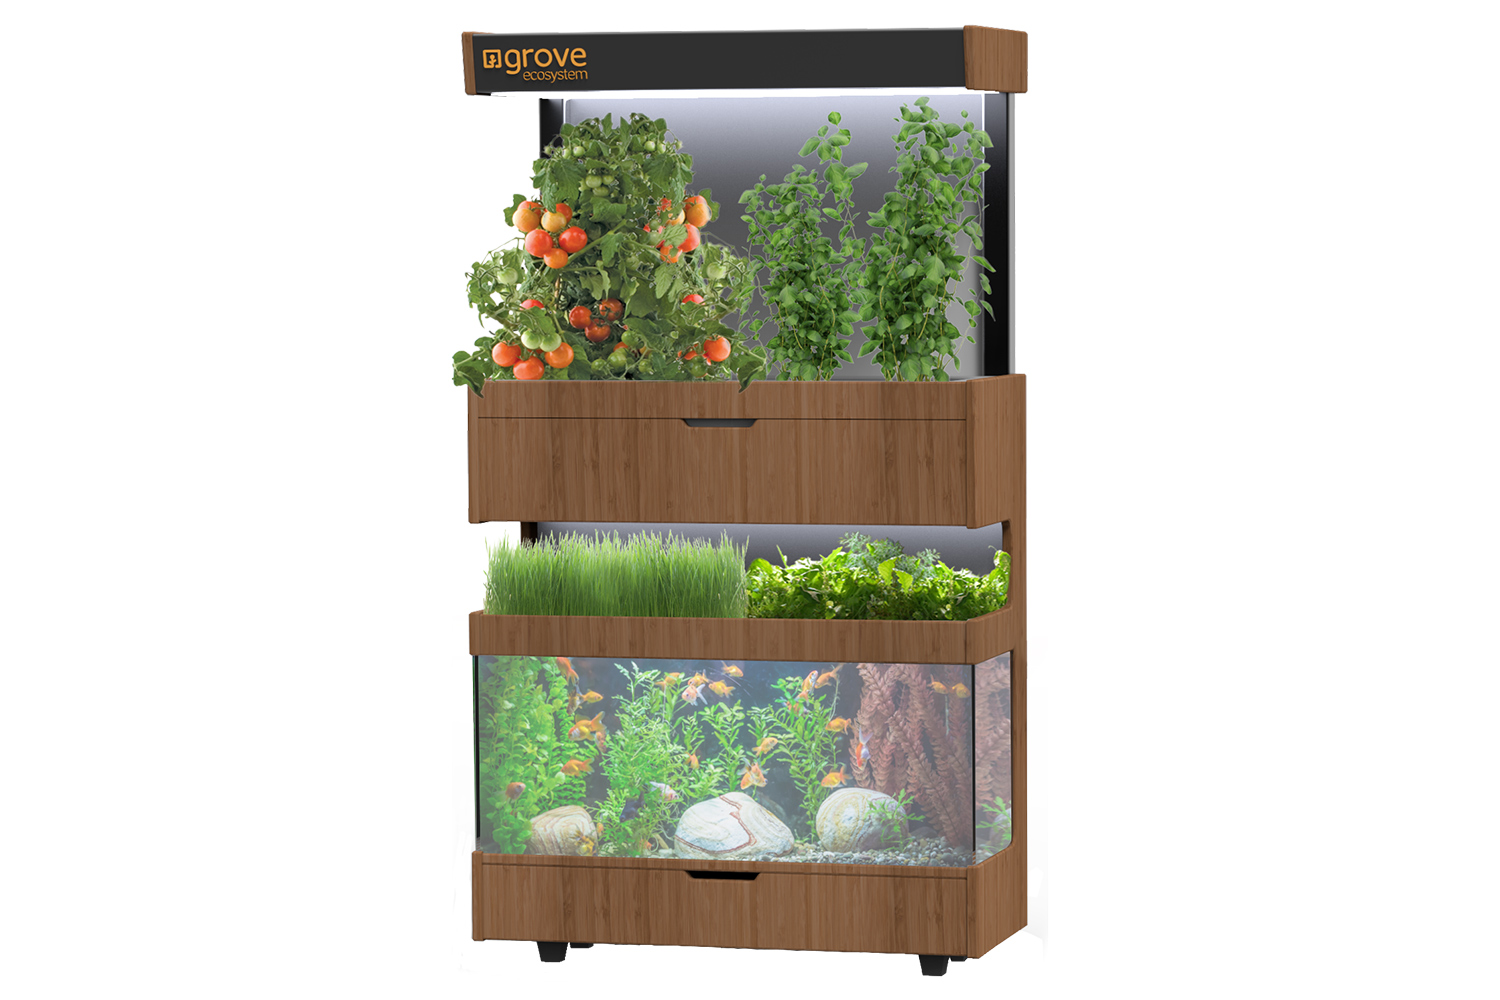 the grove ecosystem launches a kickstarter for its indoor garden render